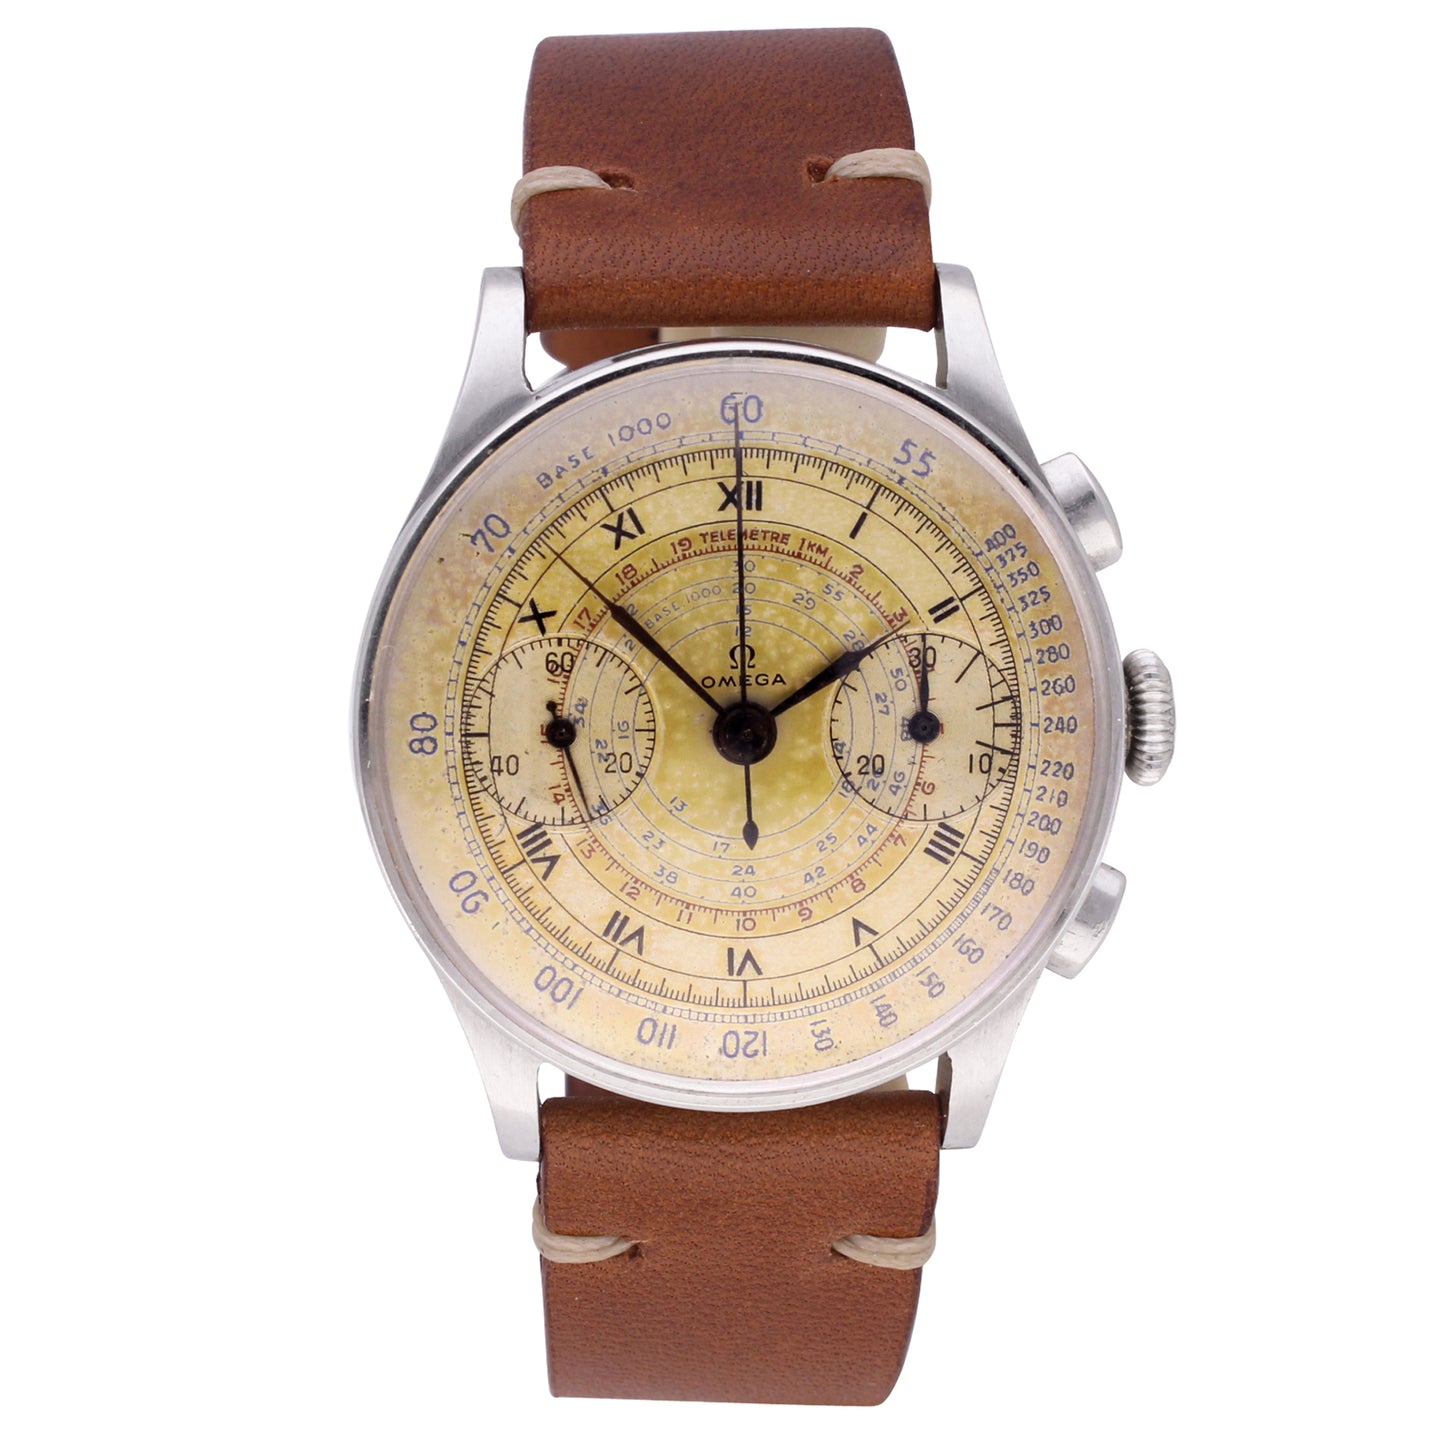 Stainless steel chronograph 33.3 wristwatch. Made 1944